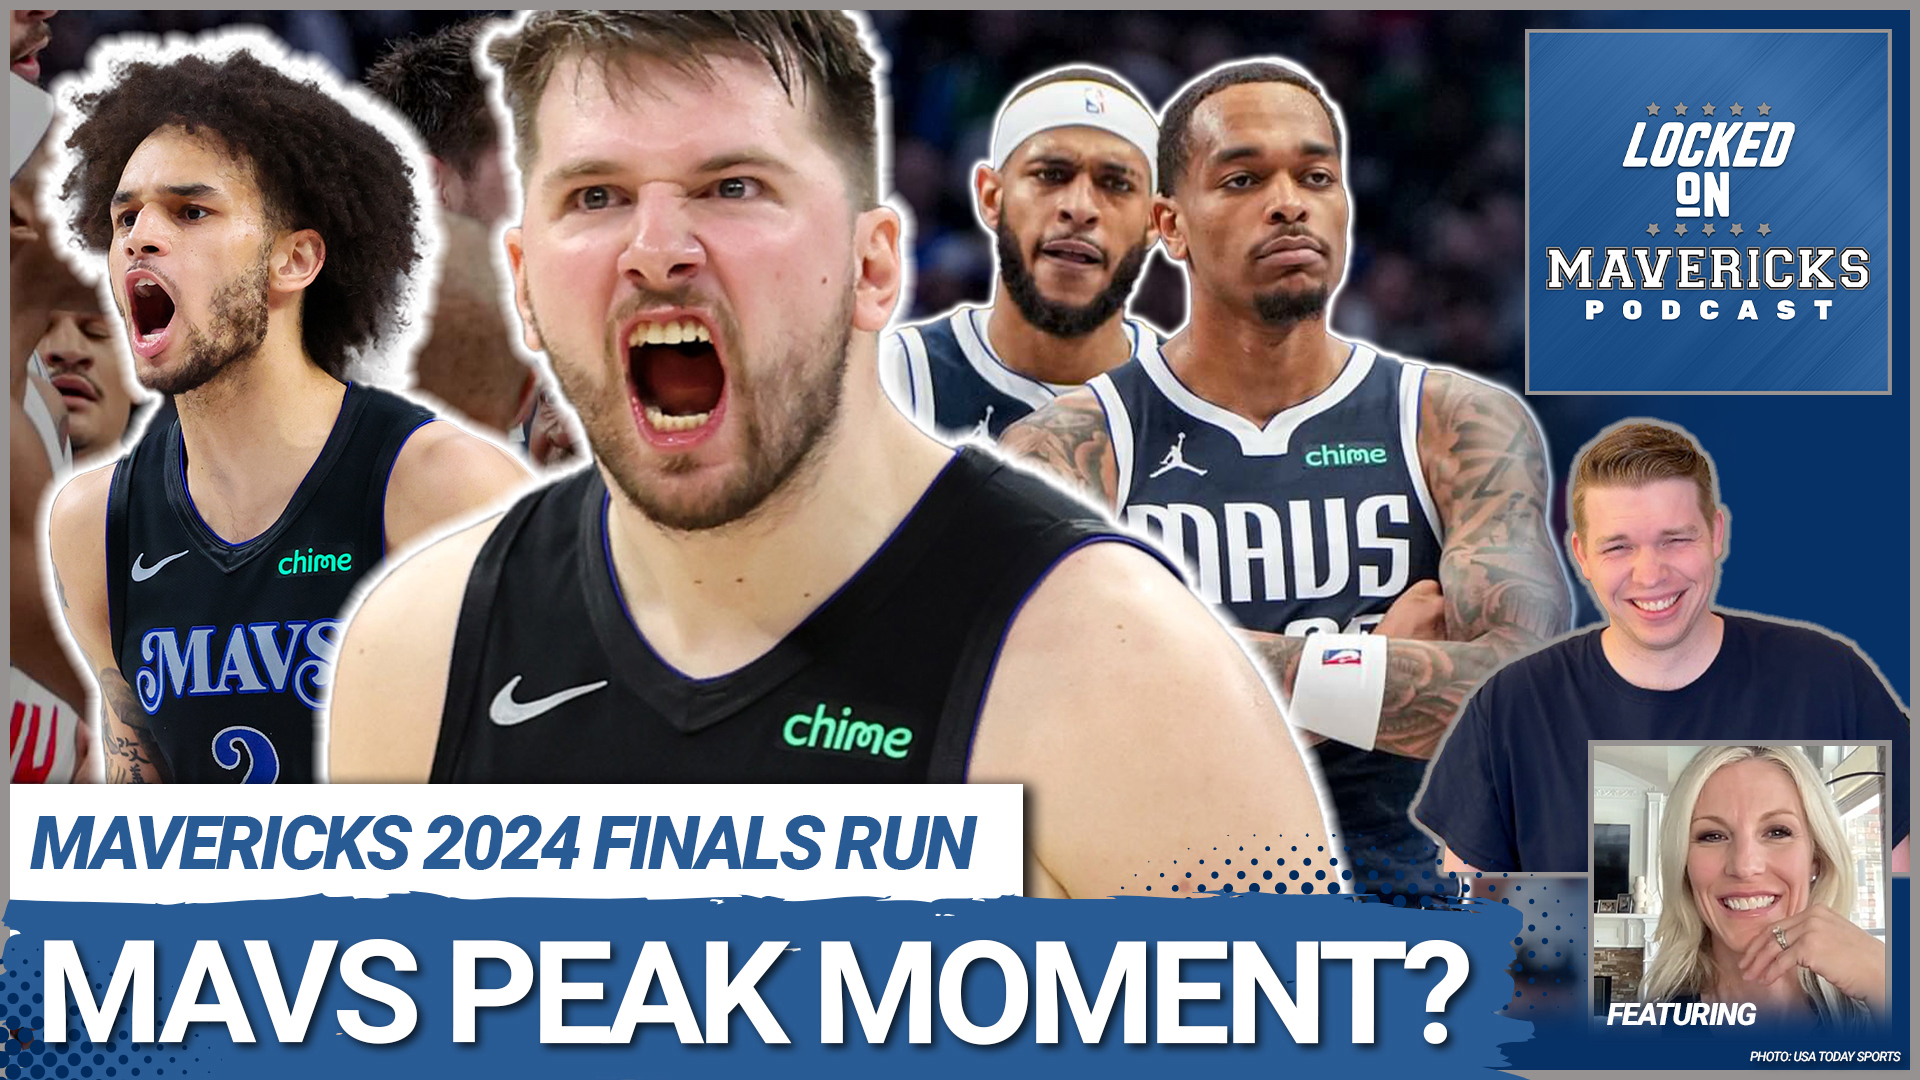 Nick Angstadt & Dana Larson share the best moments from the Dallas Mavericks 2024 run to the NBA Finals: Luka Doncic's Game Winner, Pj Washington's pose, and more...